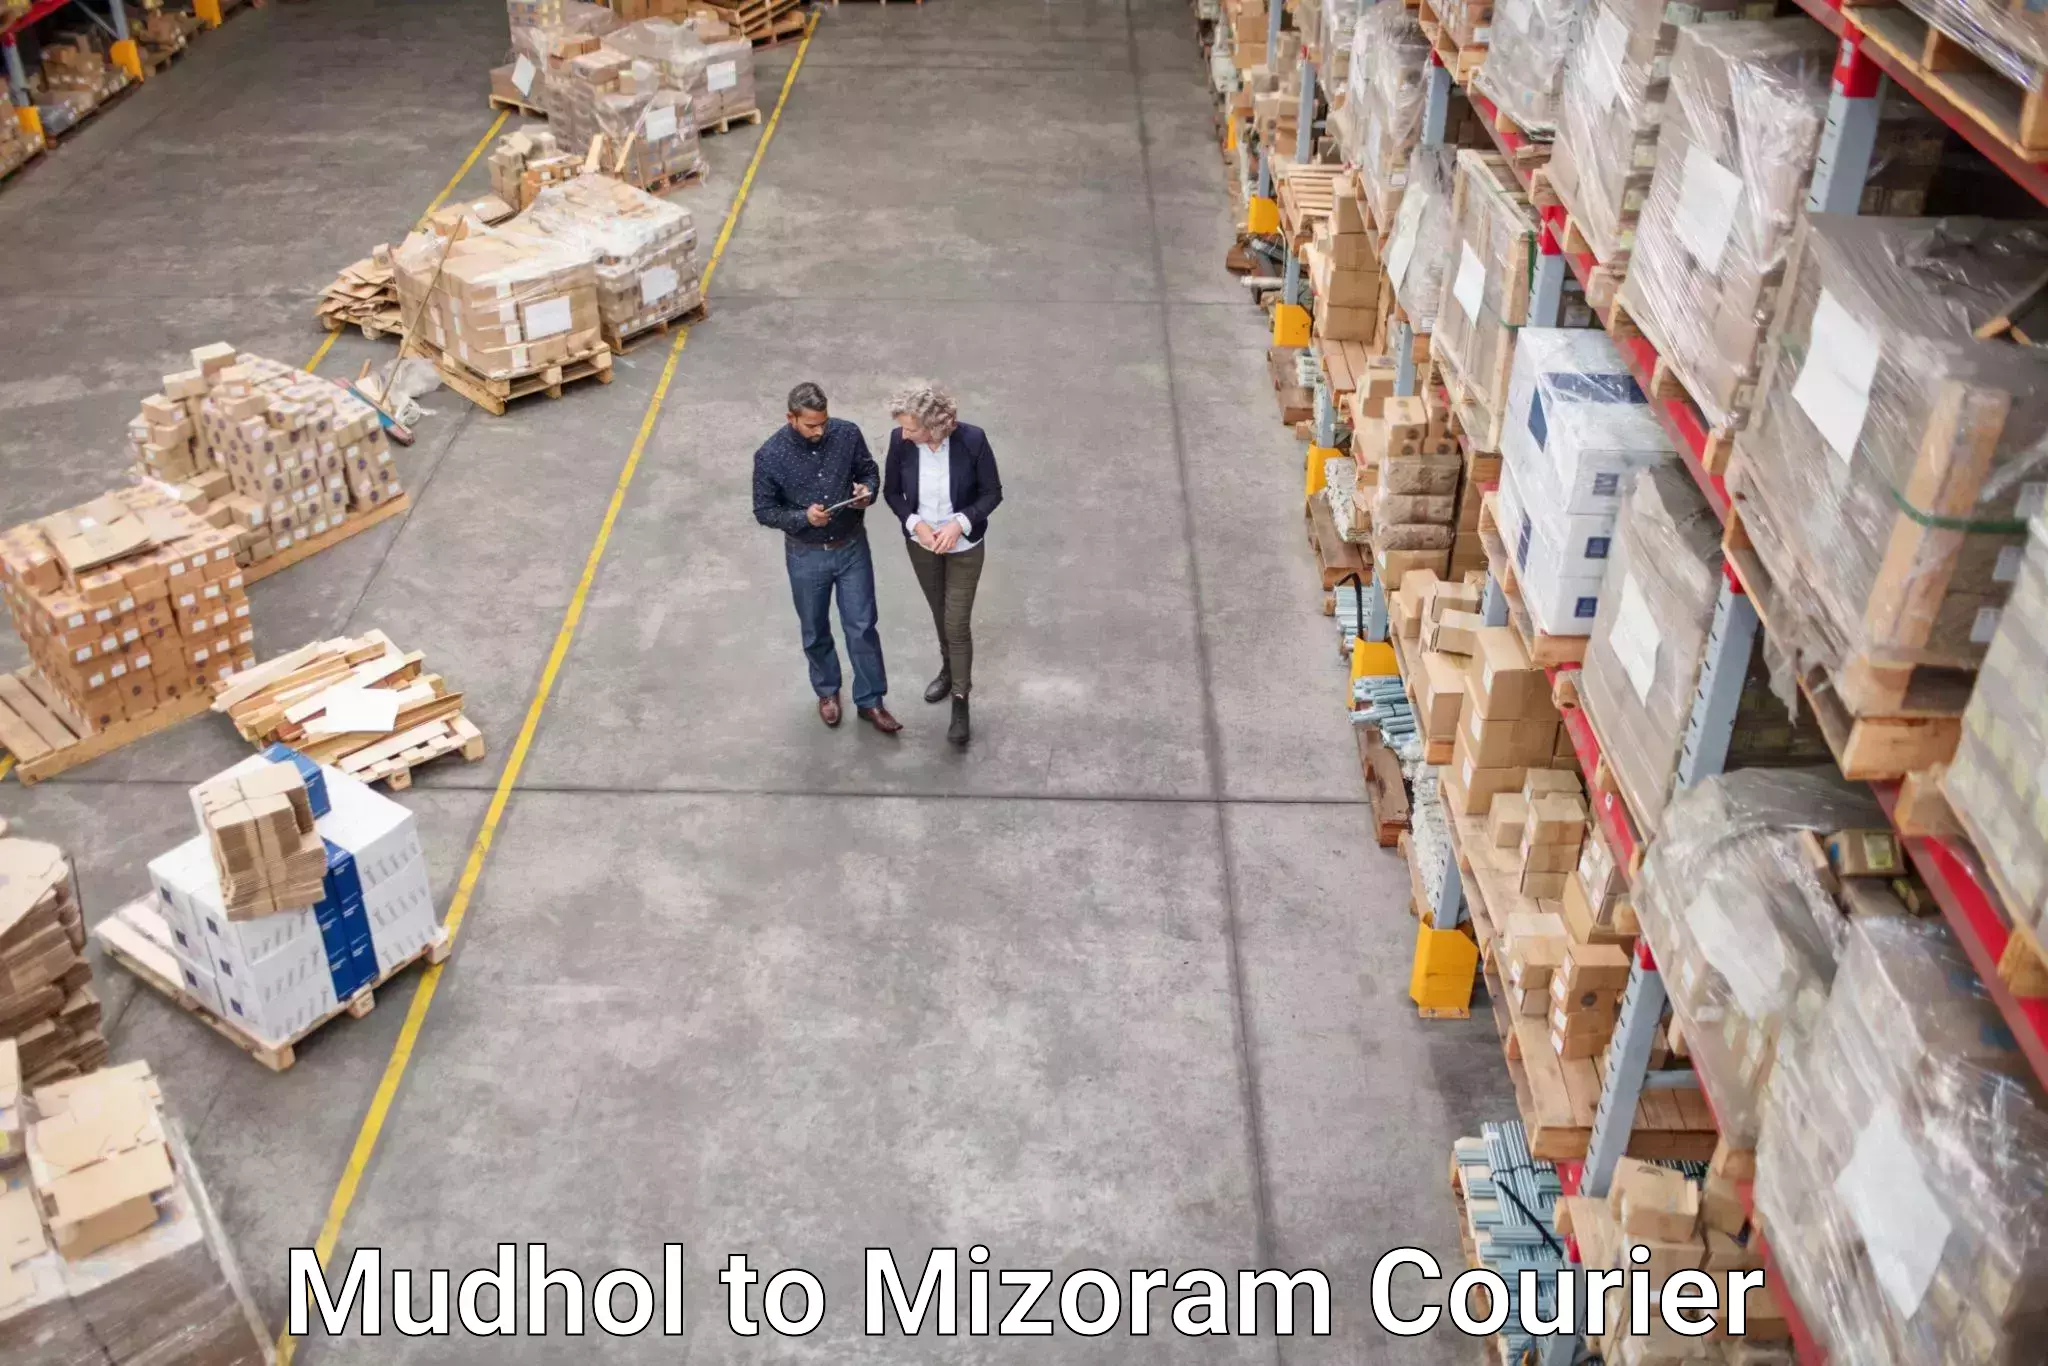 Courier service partnerships in Mudhol to Mizoram